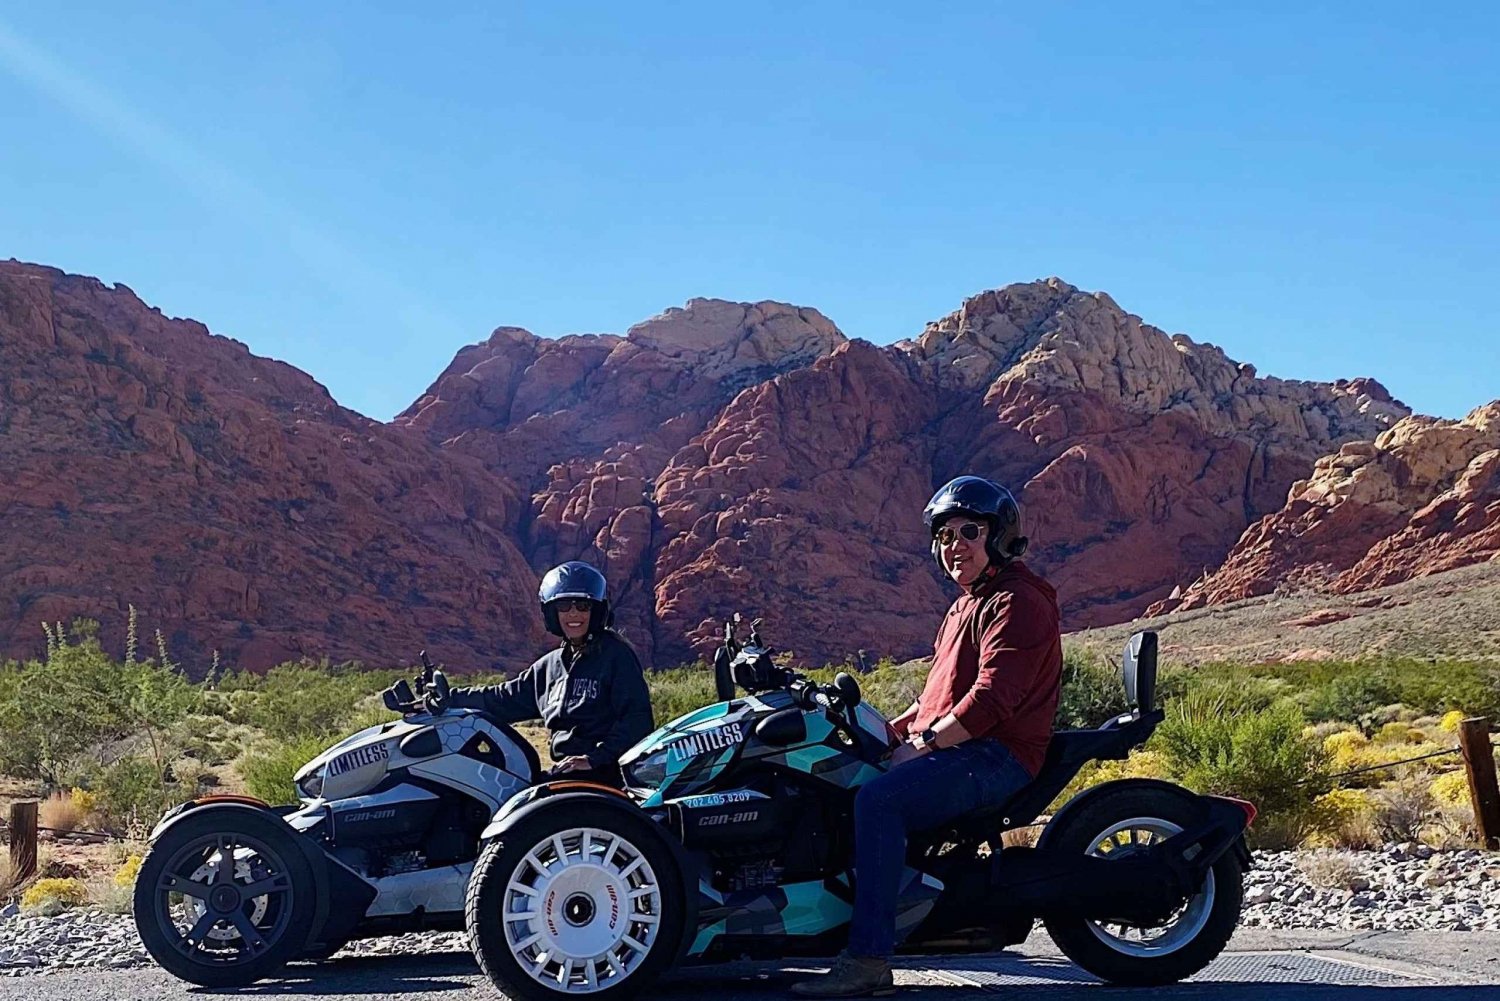 Red Rock Canyon: Privat guidet tur på trehjulet cykel!